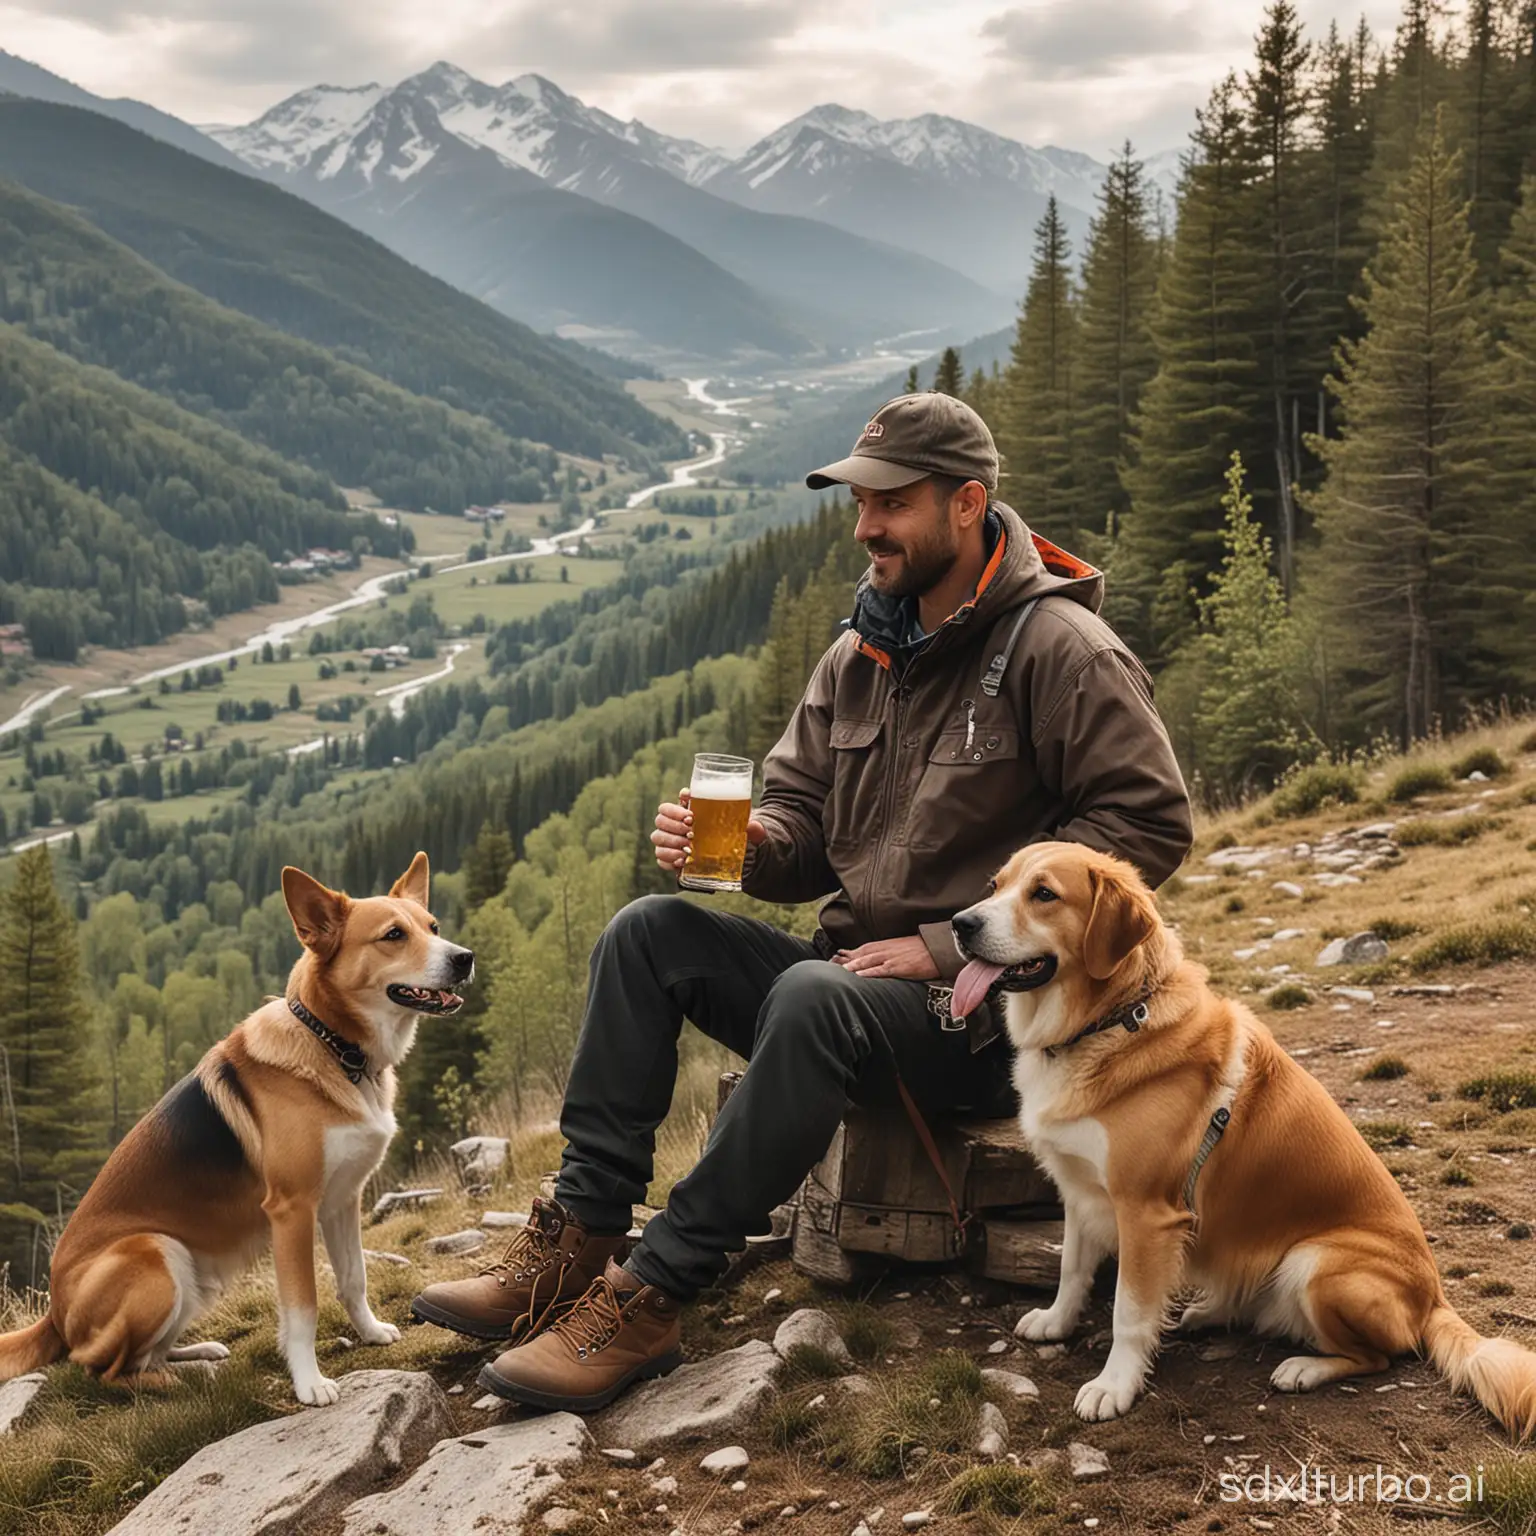 man with dog and beer in mountains with trees